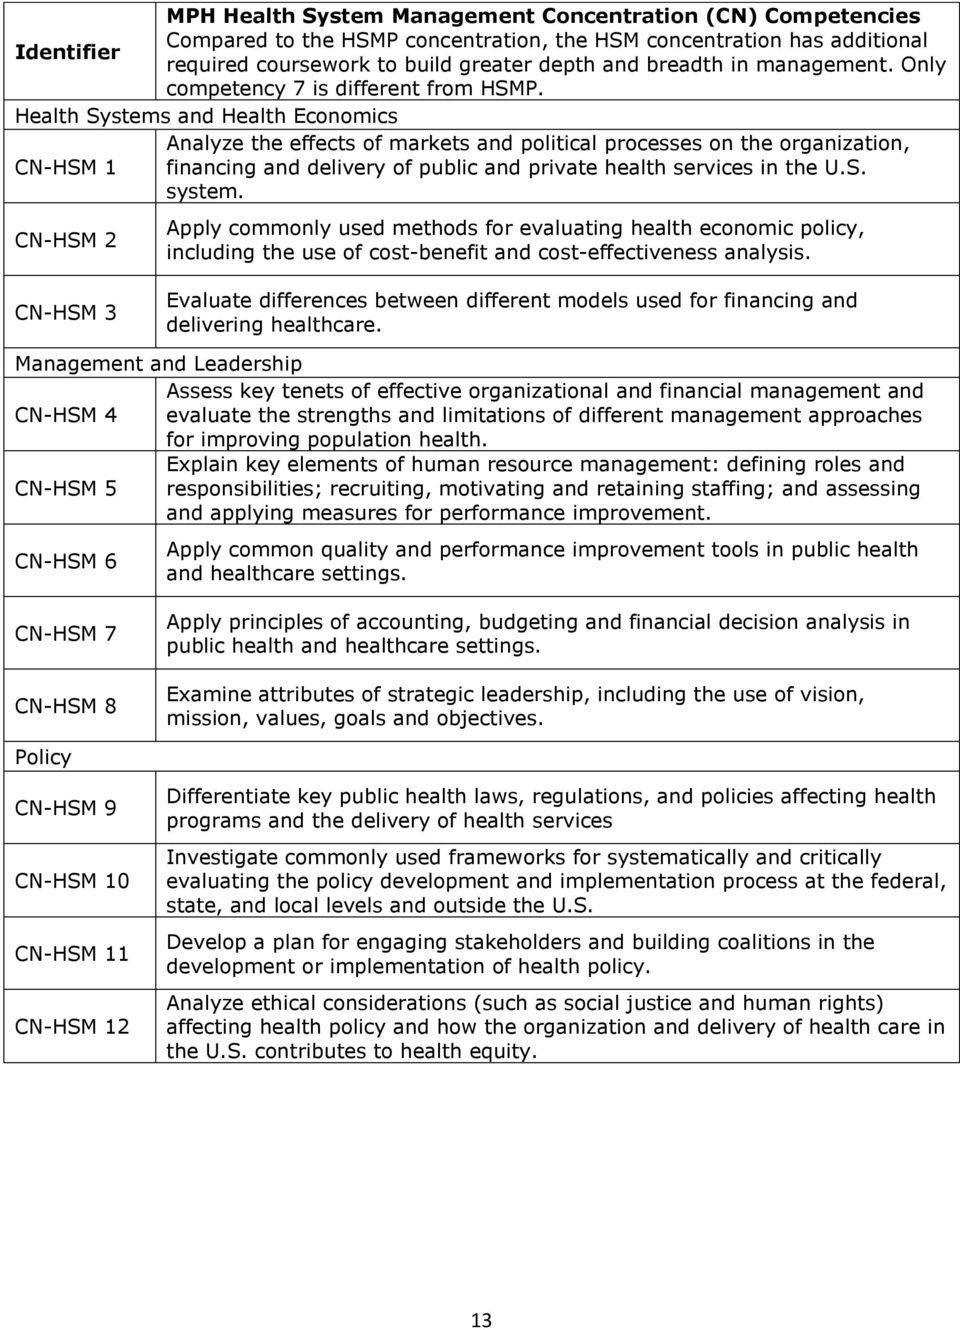 Health Systems and Health Economics Analyze the effects of markets and political processes on the organization, CN-HSM 1 financing and delivery of public and private health services in the U.S. system.